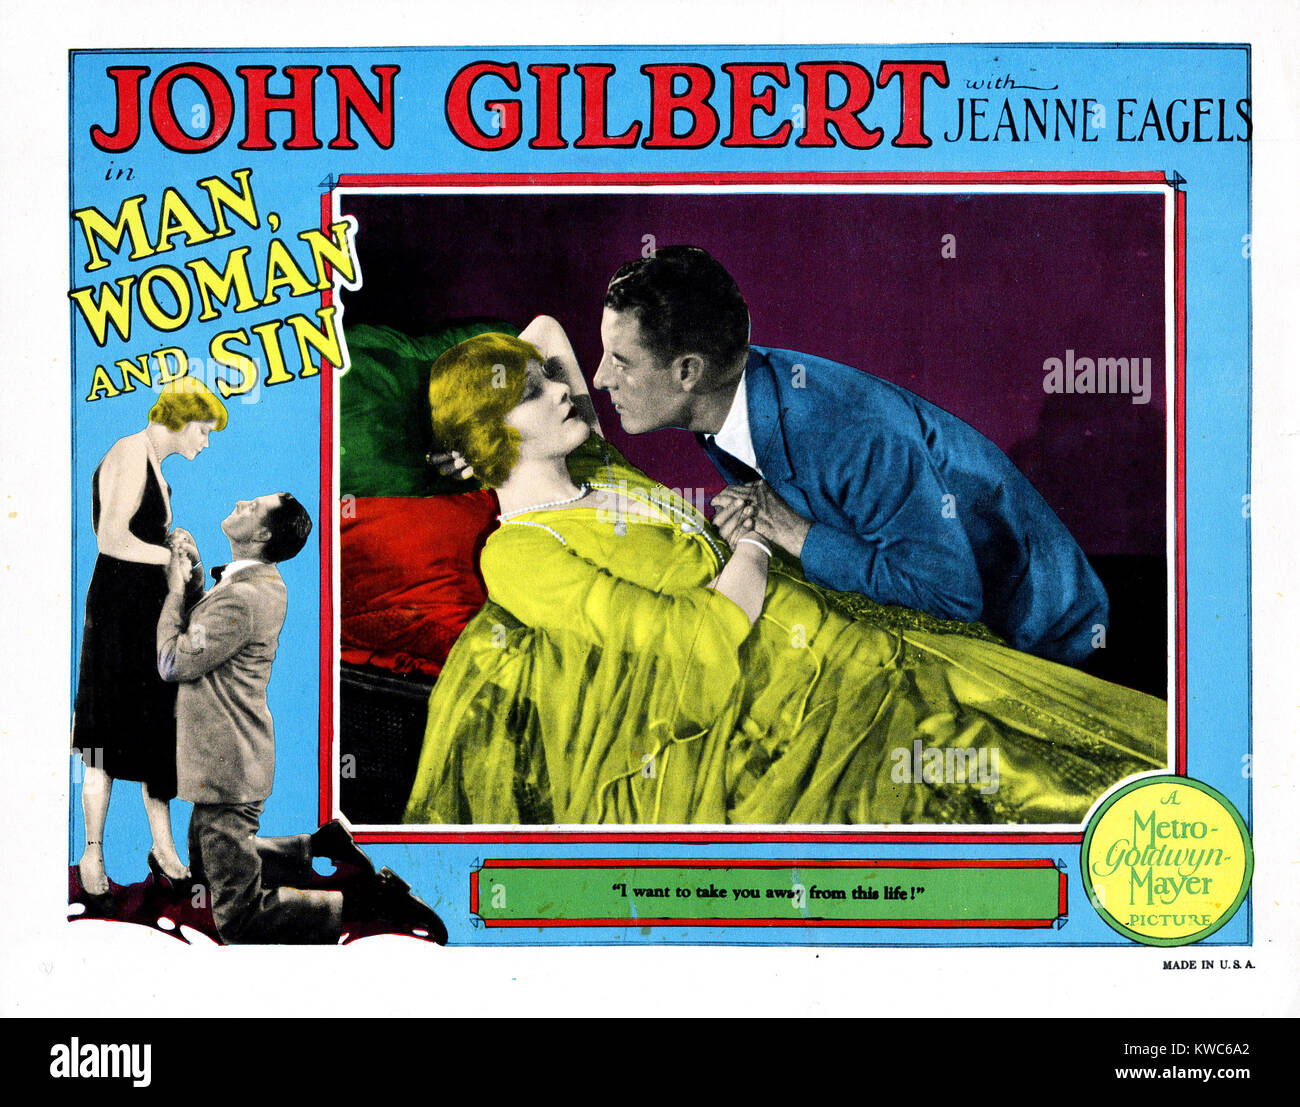 MAN, WOMAN AND SIN, from left: Jeanne Eagels, John Gilbert, 1927 Stock Photo